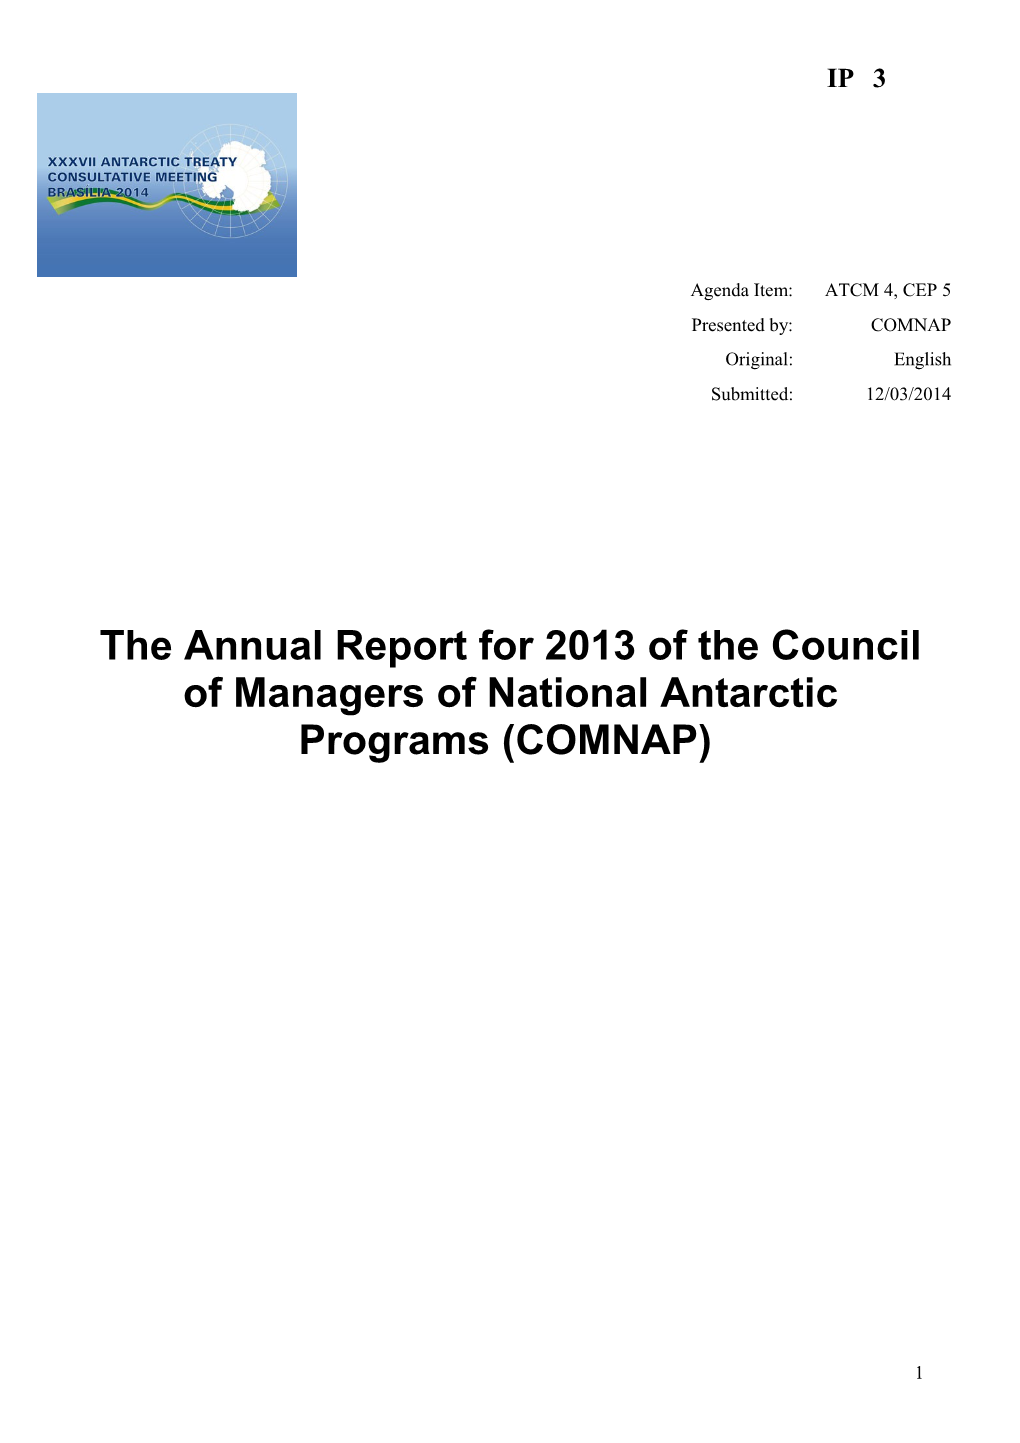 The Annual Report for 2013 of the Council of Managers of National Antarctic Programs (COMNAP)